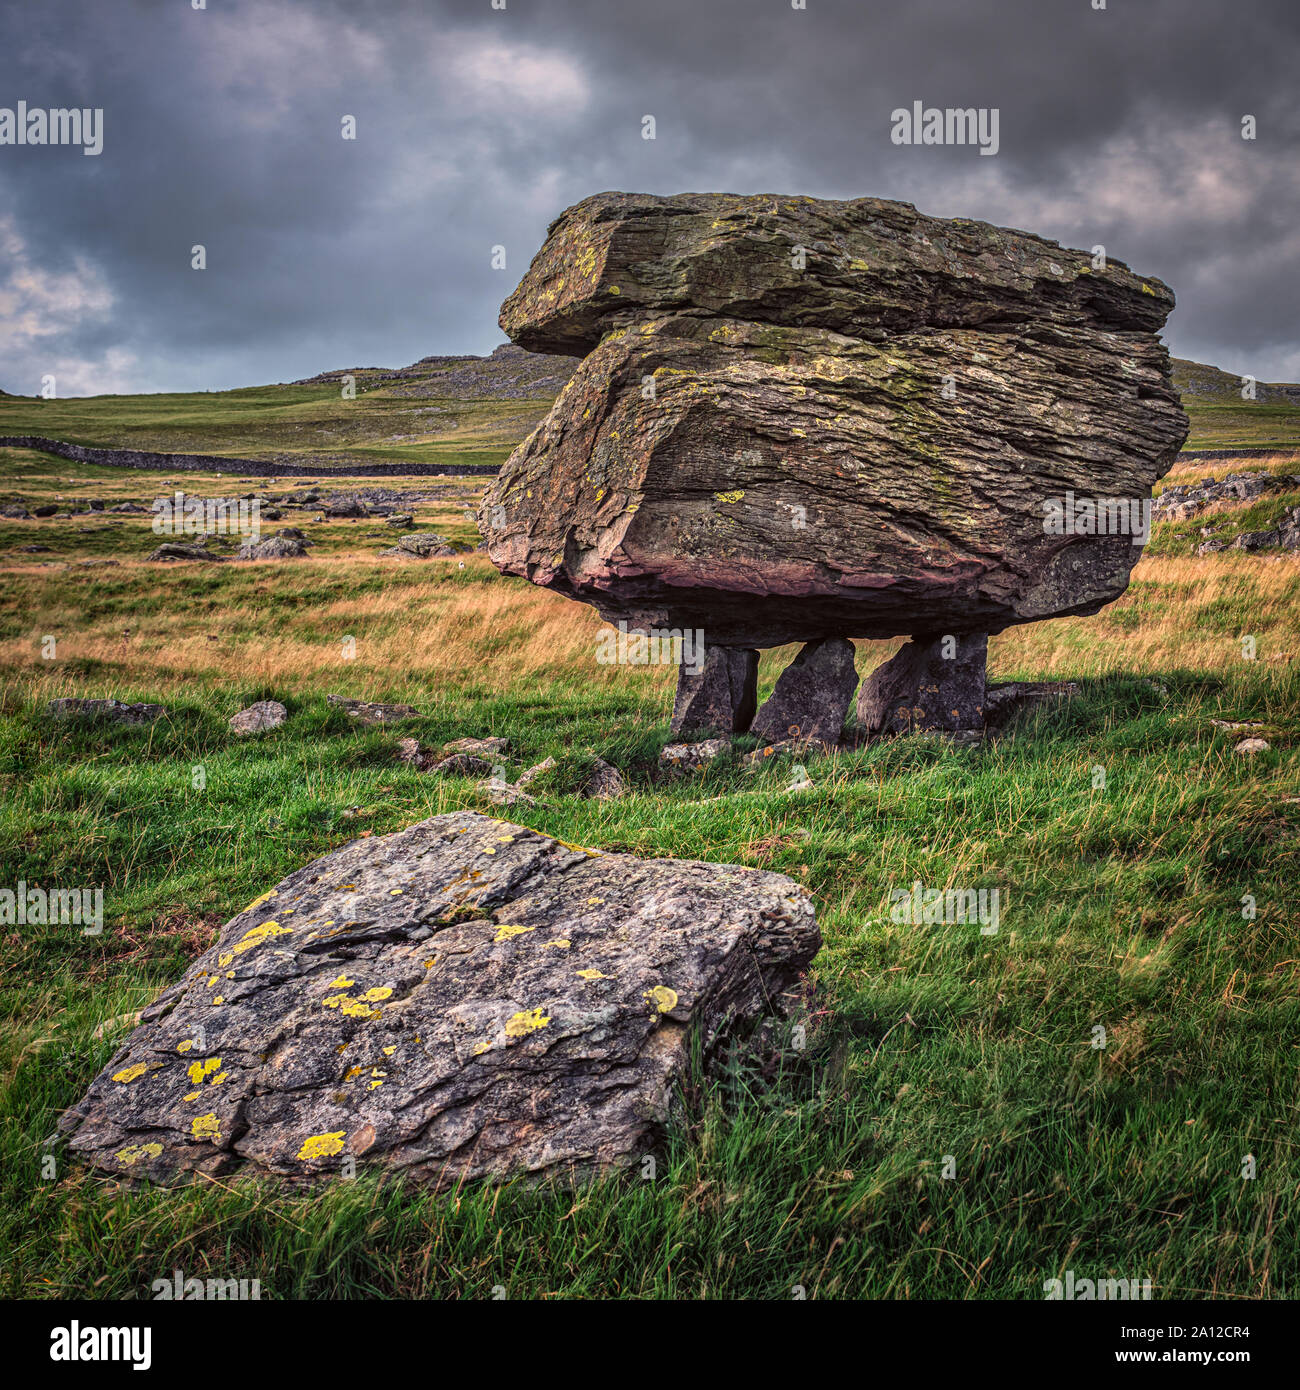 The Norber erratics are a geologically significant set of glacial erratic boulders in the Yorkshire Dales. Stock Photo